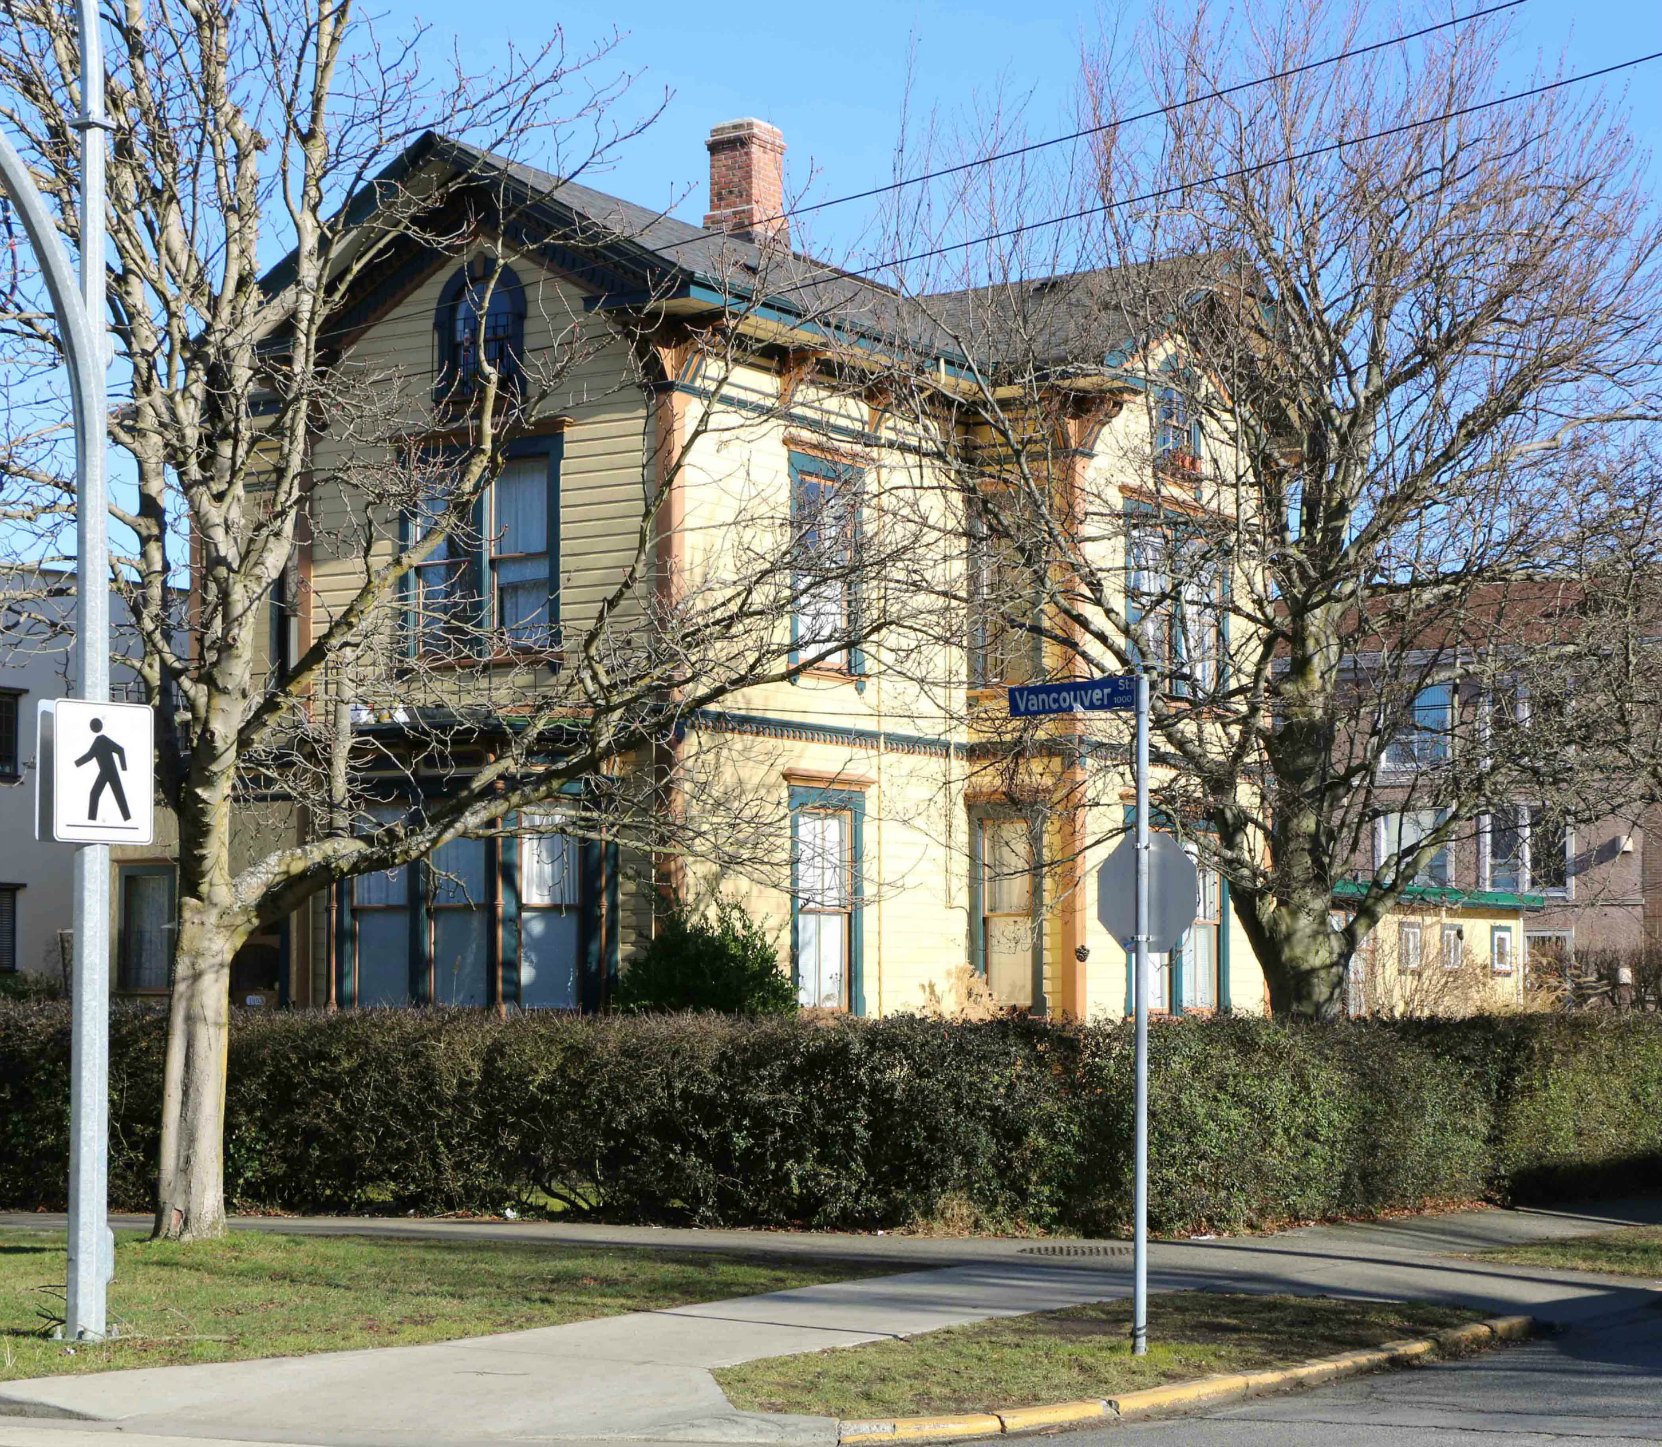 1003 Vancouver Street, built in 1885 by architect John Teague for Charles Hayward, a former Mayor of Victoria. It is now apartments. (photo: Victoria Online Sightseeing Tours)